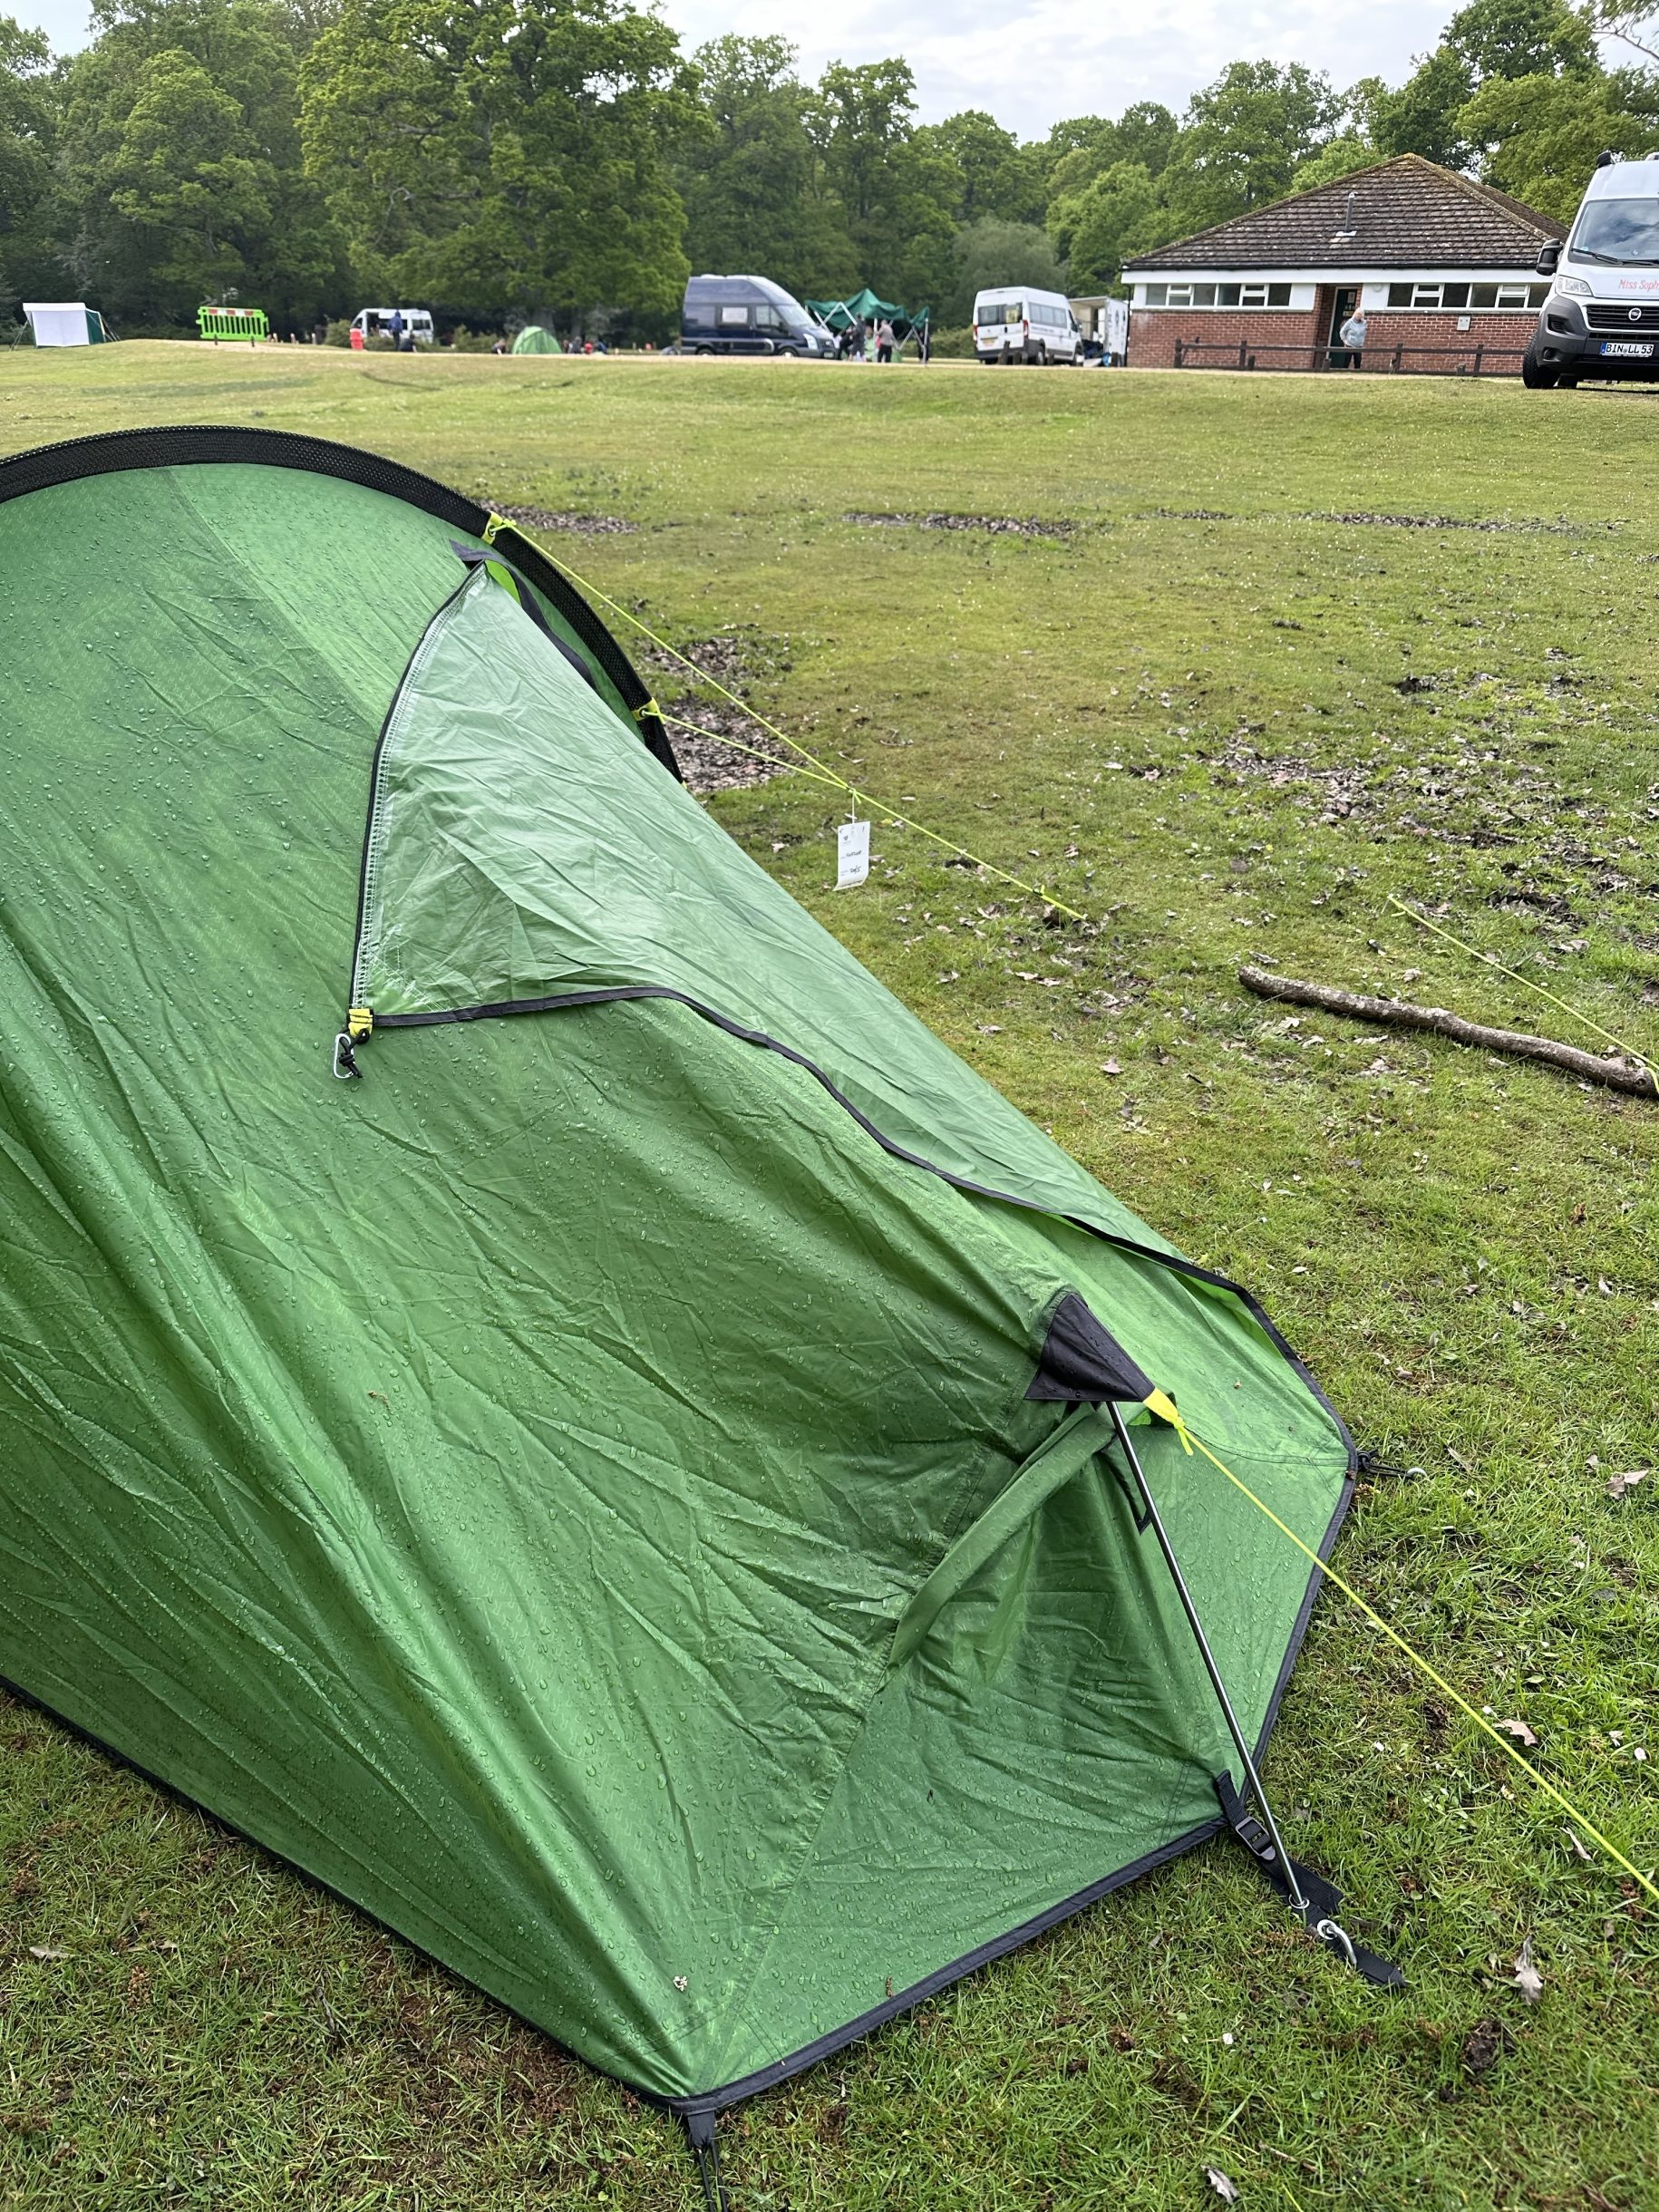 Rain covered green tent in a field